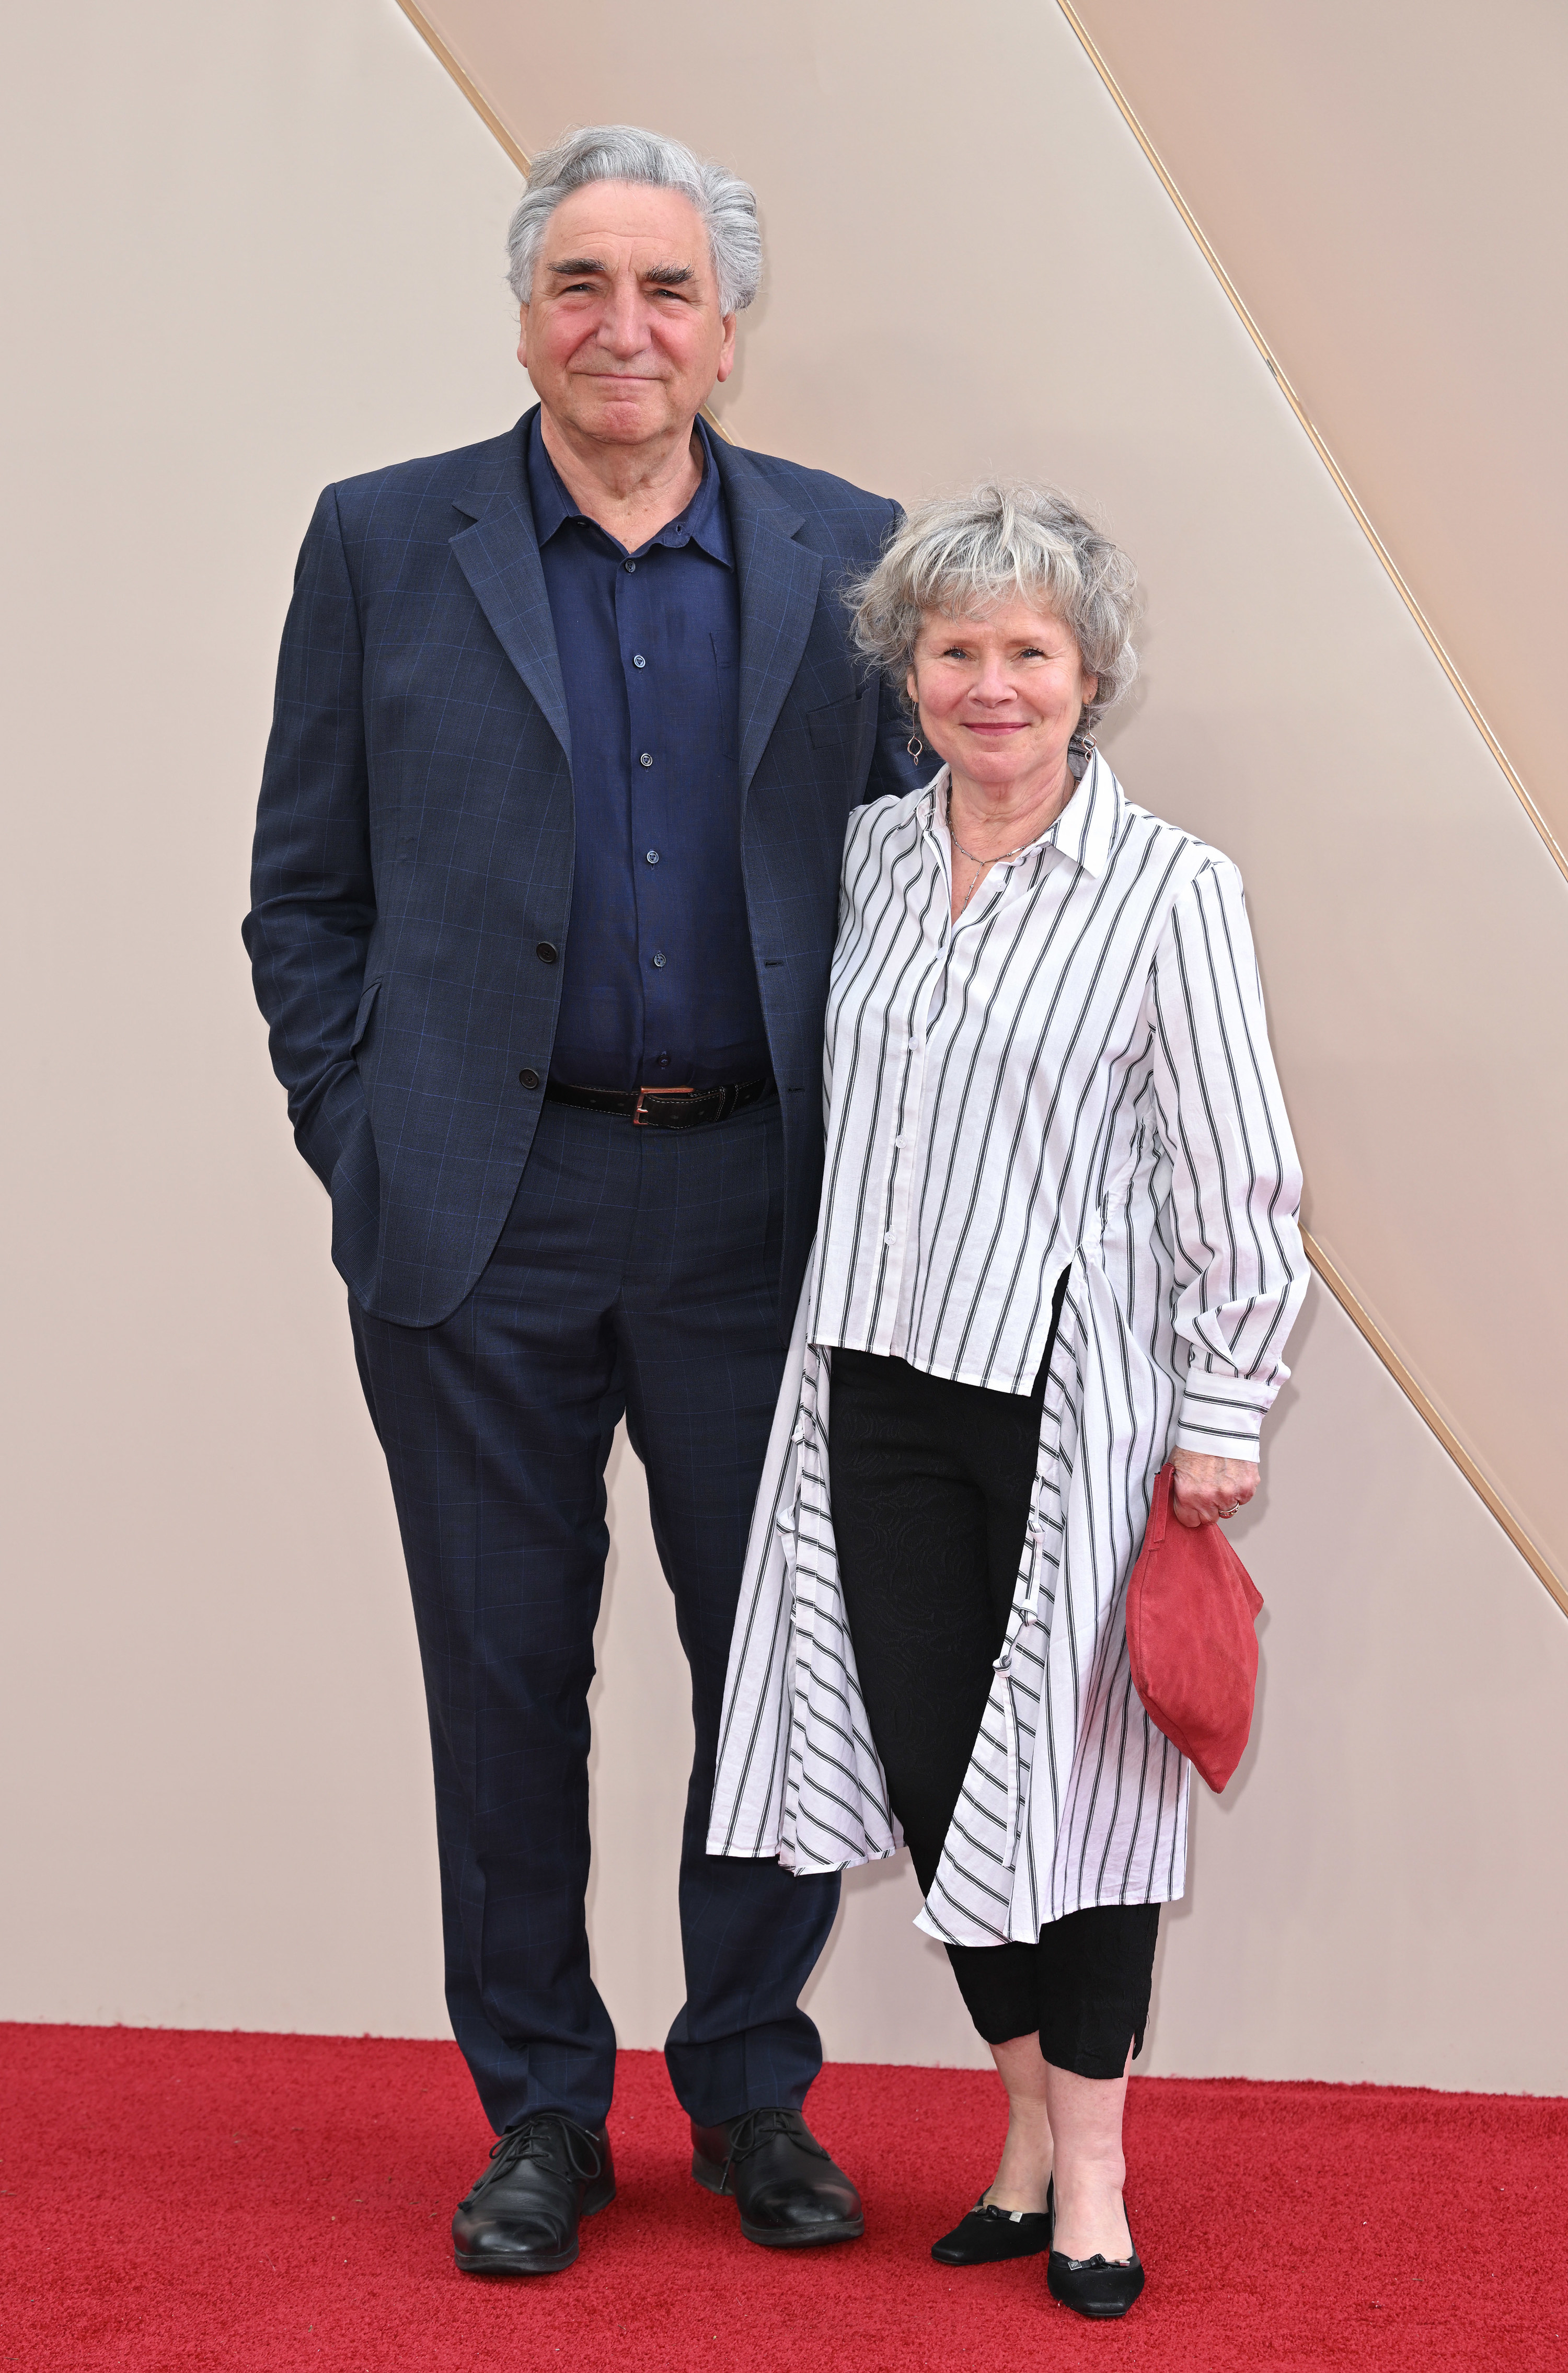 Jim Carter with his wife at a premier event